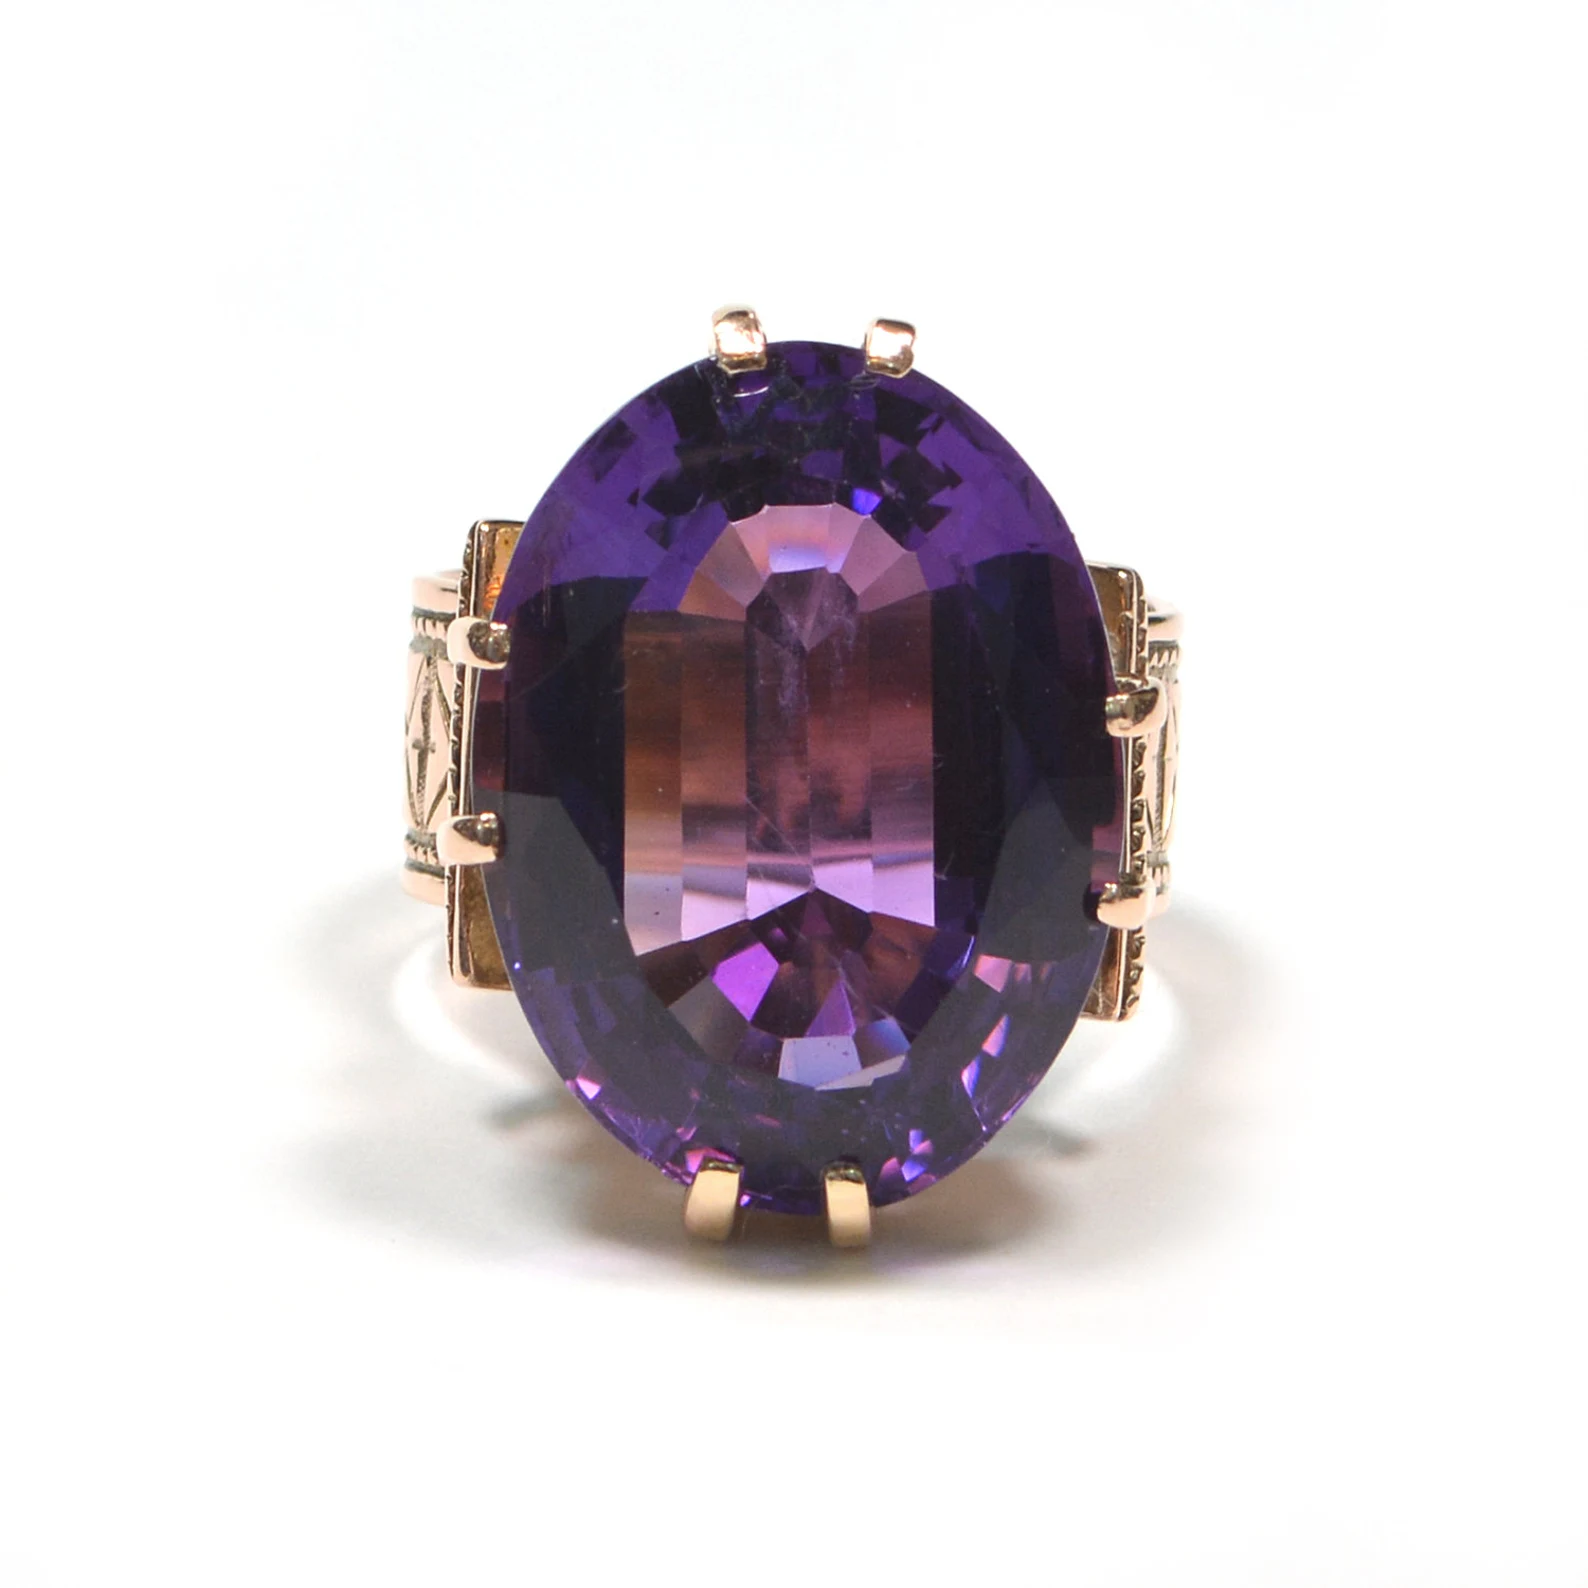 Antique Victorian 15k Rose Gold and Amethyst Ring